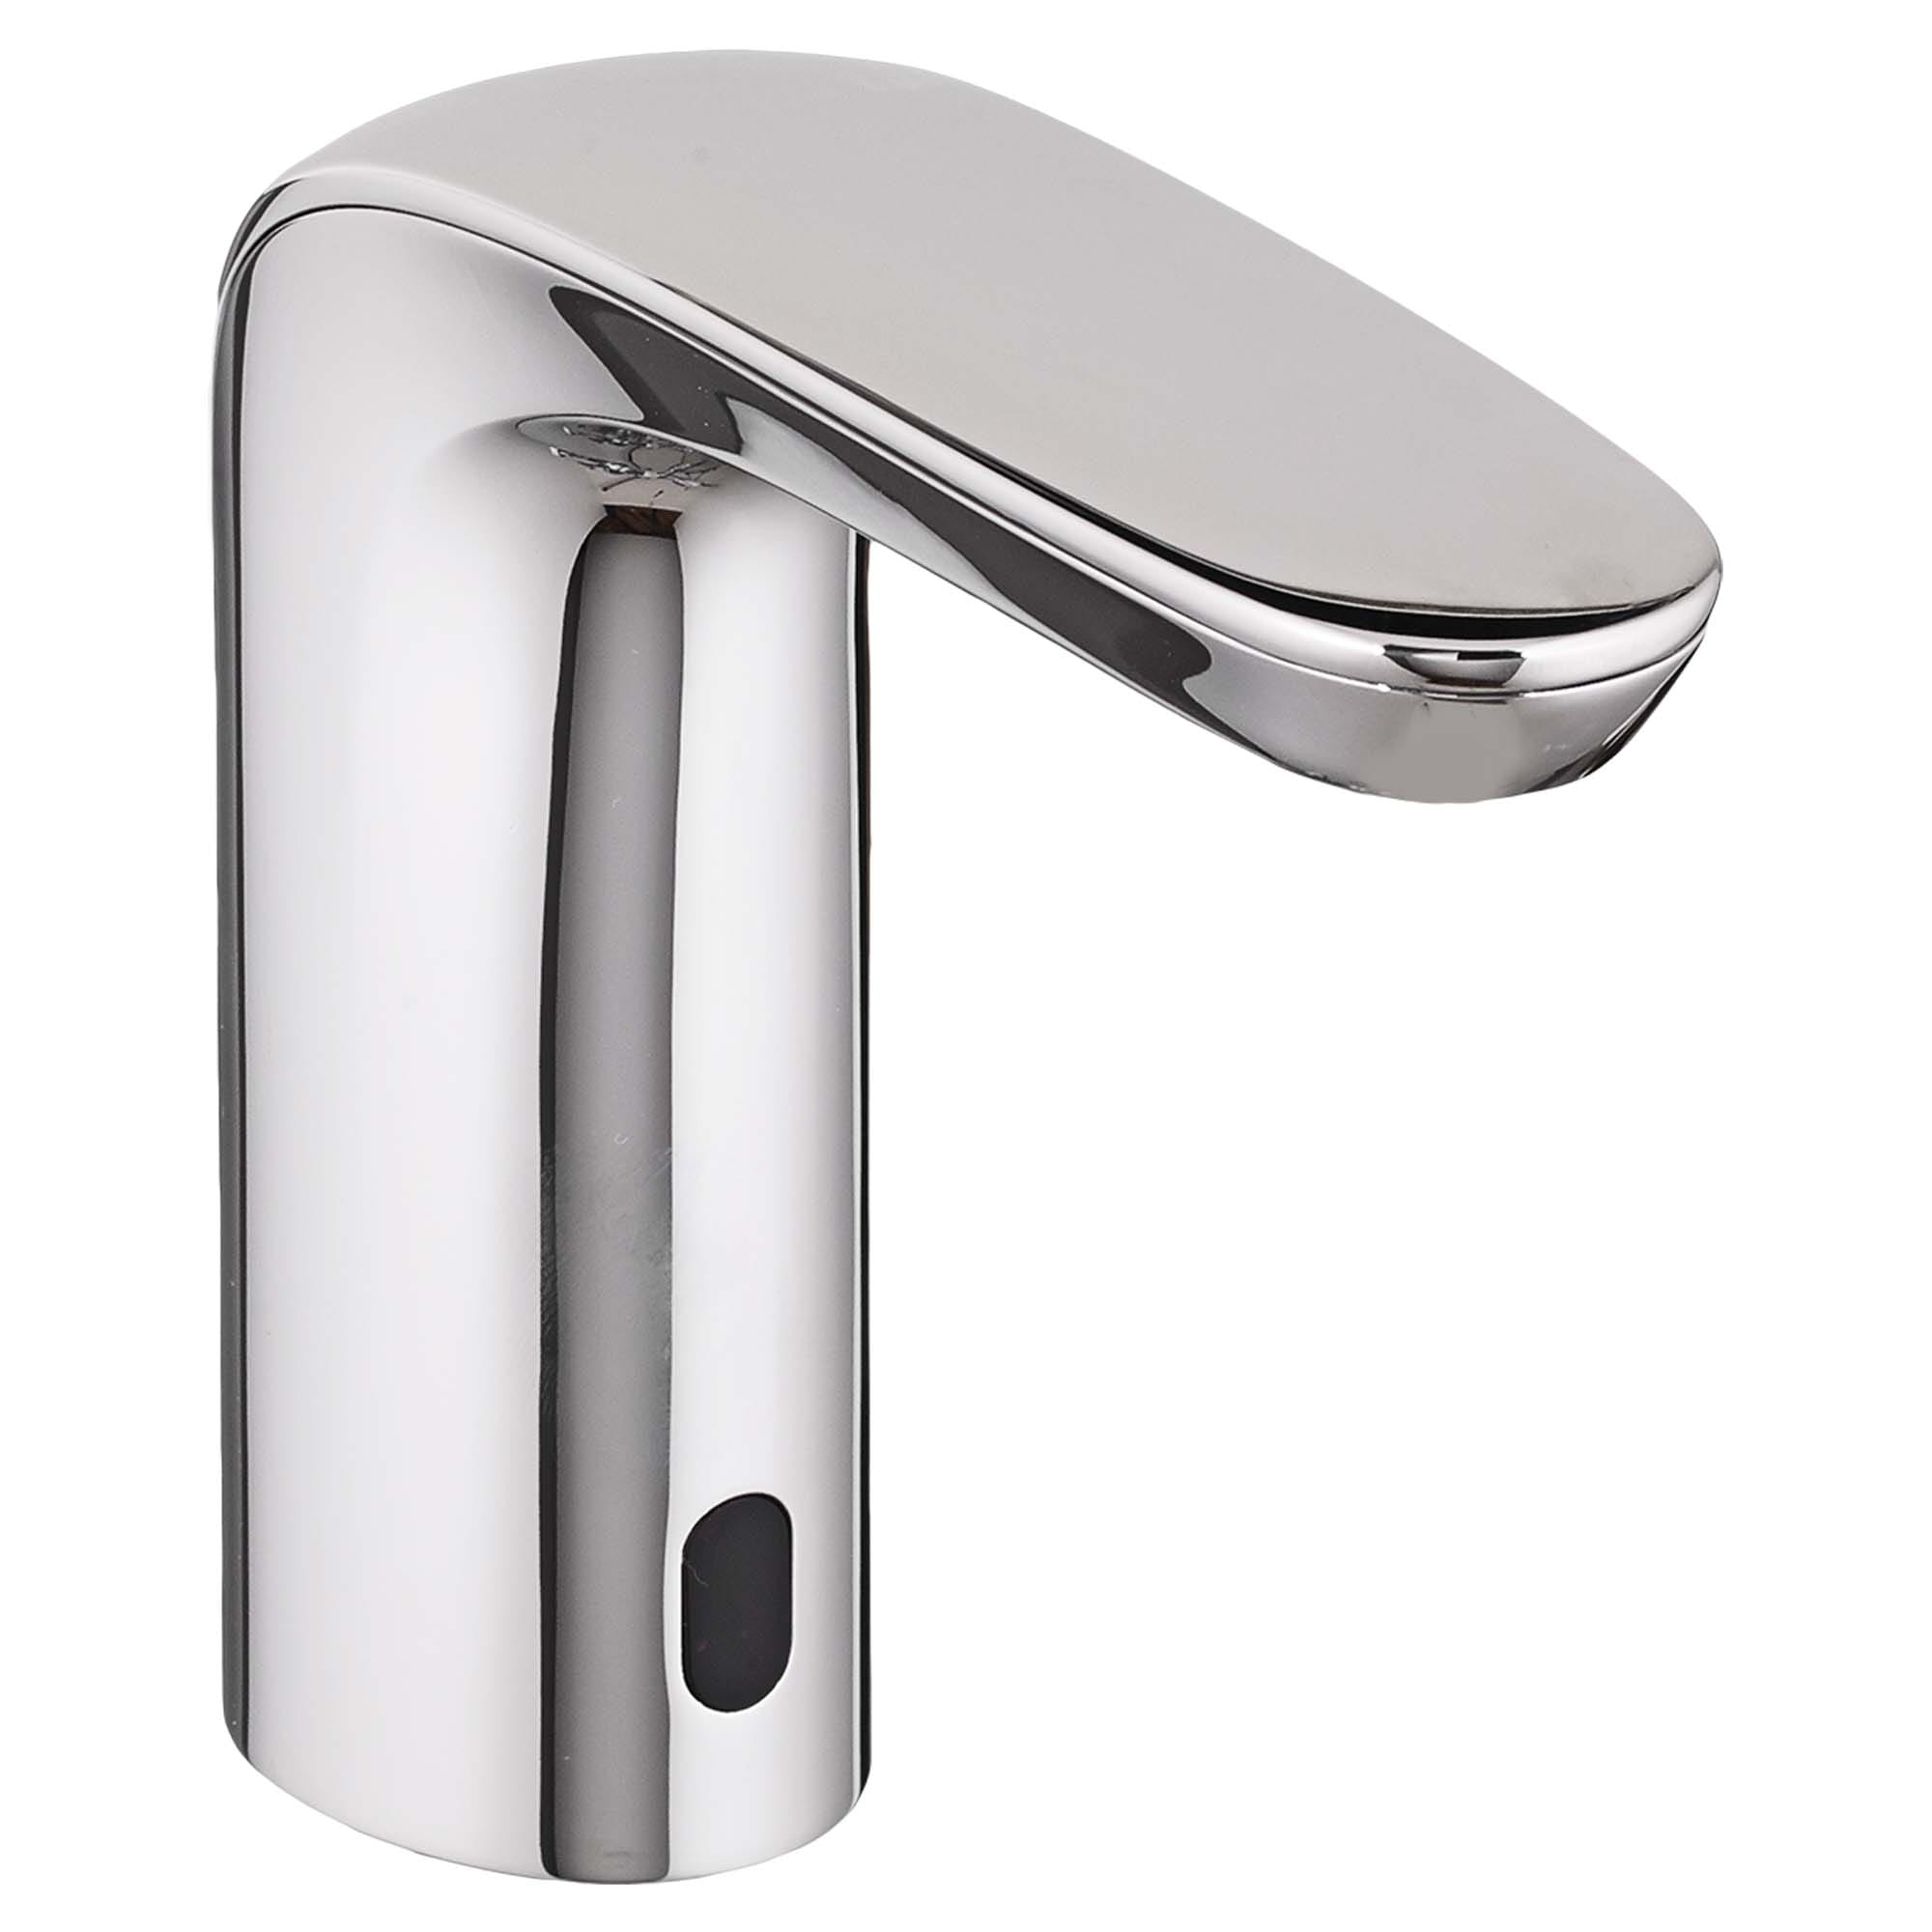 NextGen Selectronic Touchless Faucet Battery Powered 05 gpm 19 Lpm CHROME